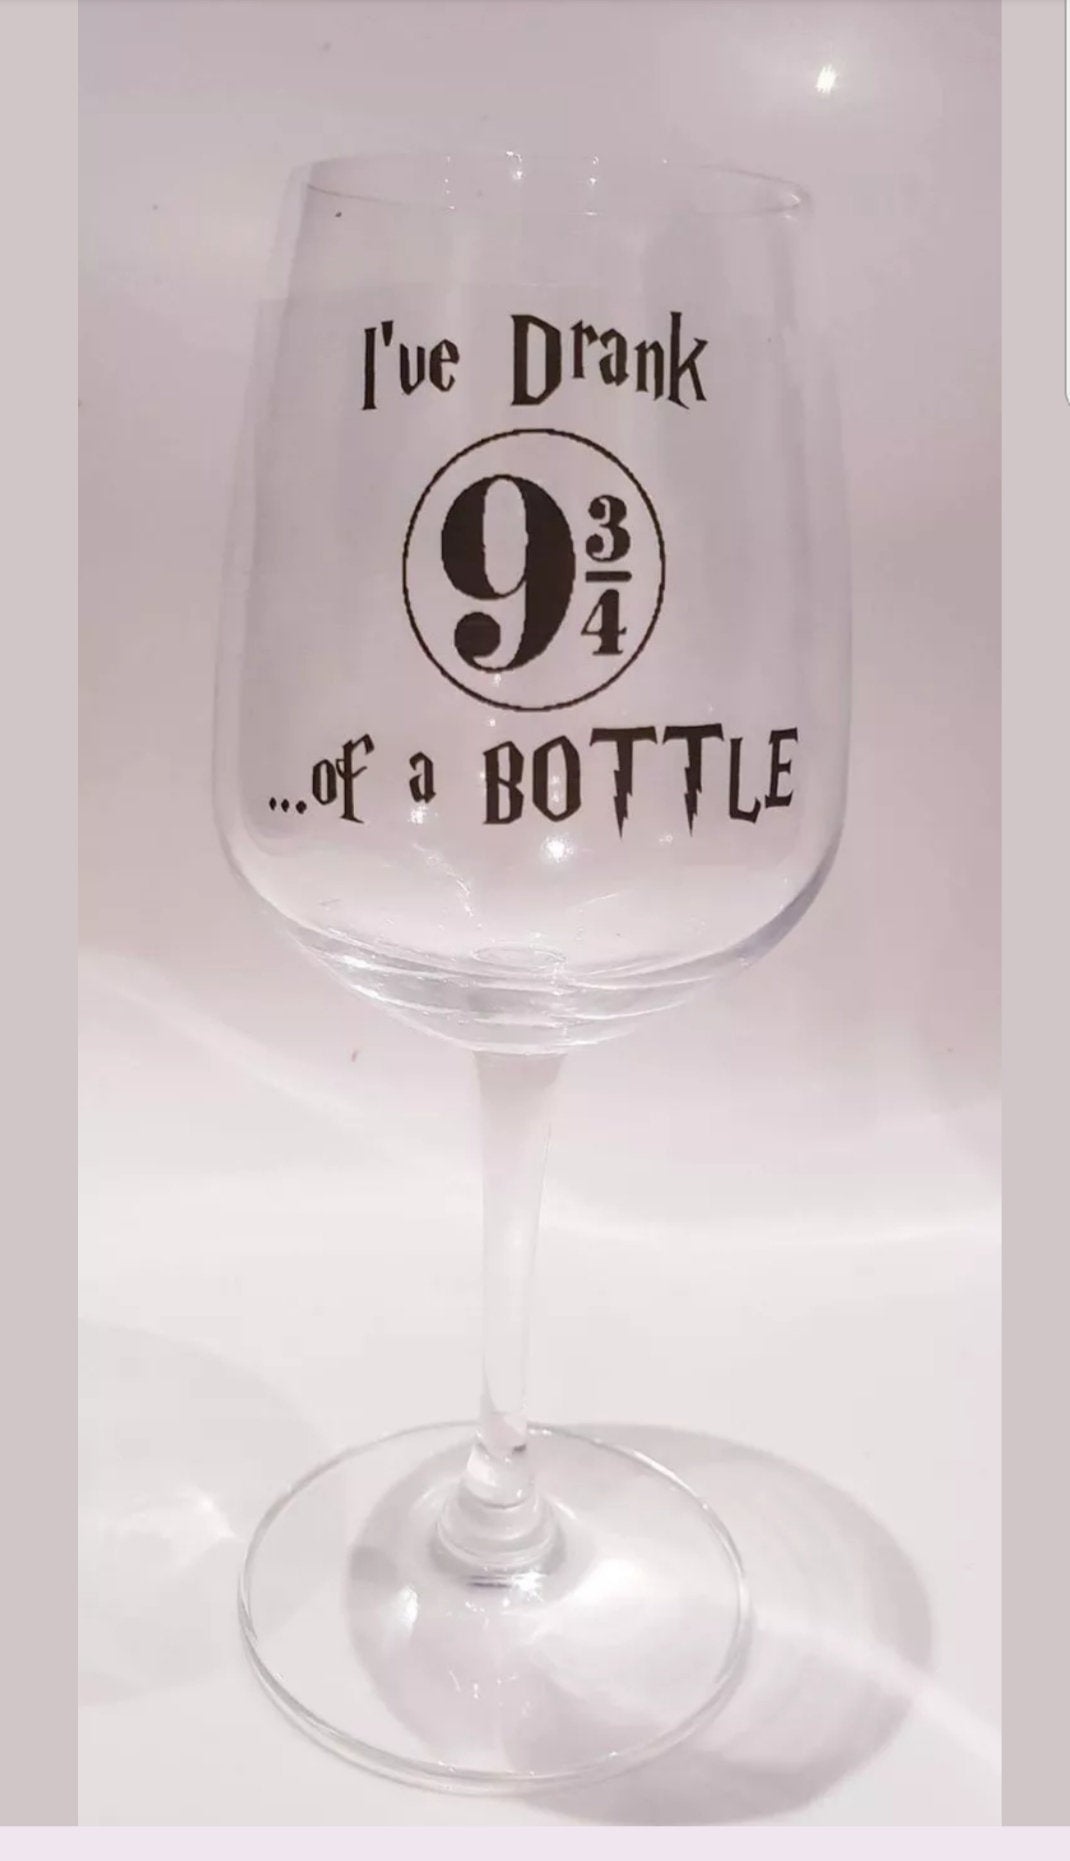 Download Harry Potter Inspired Wine Glass Sticker Pack I Don T Give A Slythersh T I Want All Of These Profane Harry Potter Wine Glass Stickers Popsugar Food Photo 4